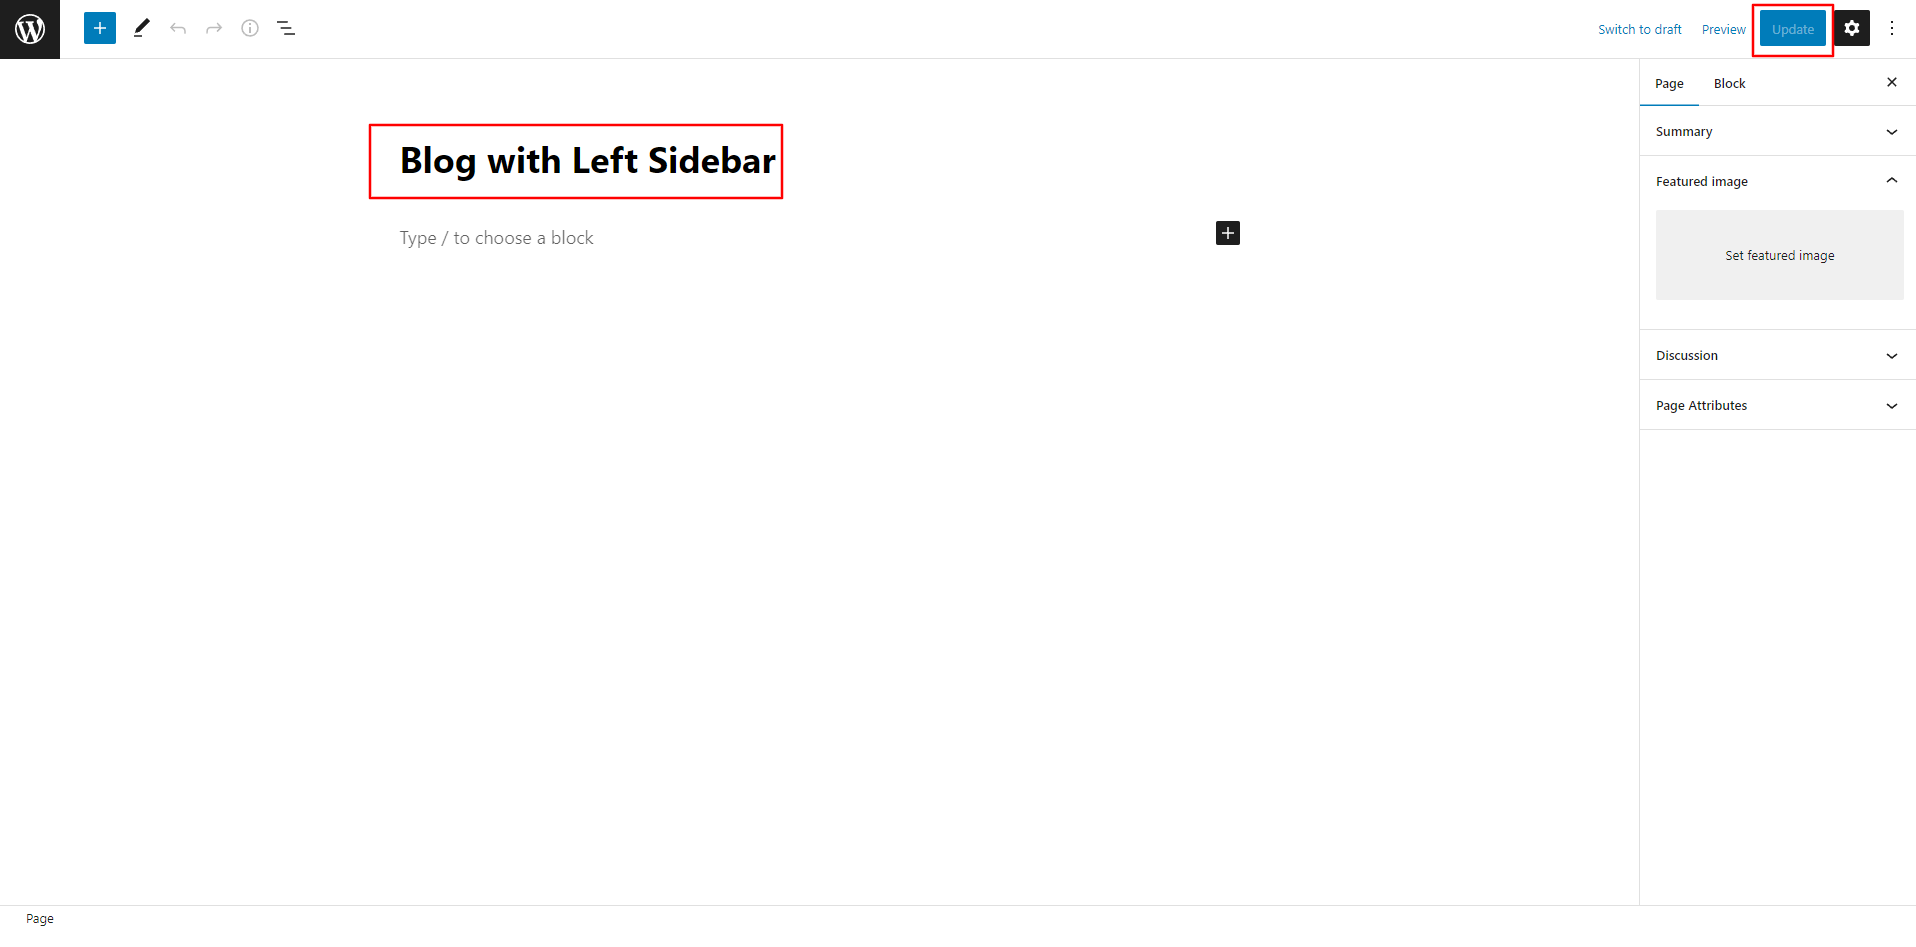 select Blog With Left Sidebar template